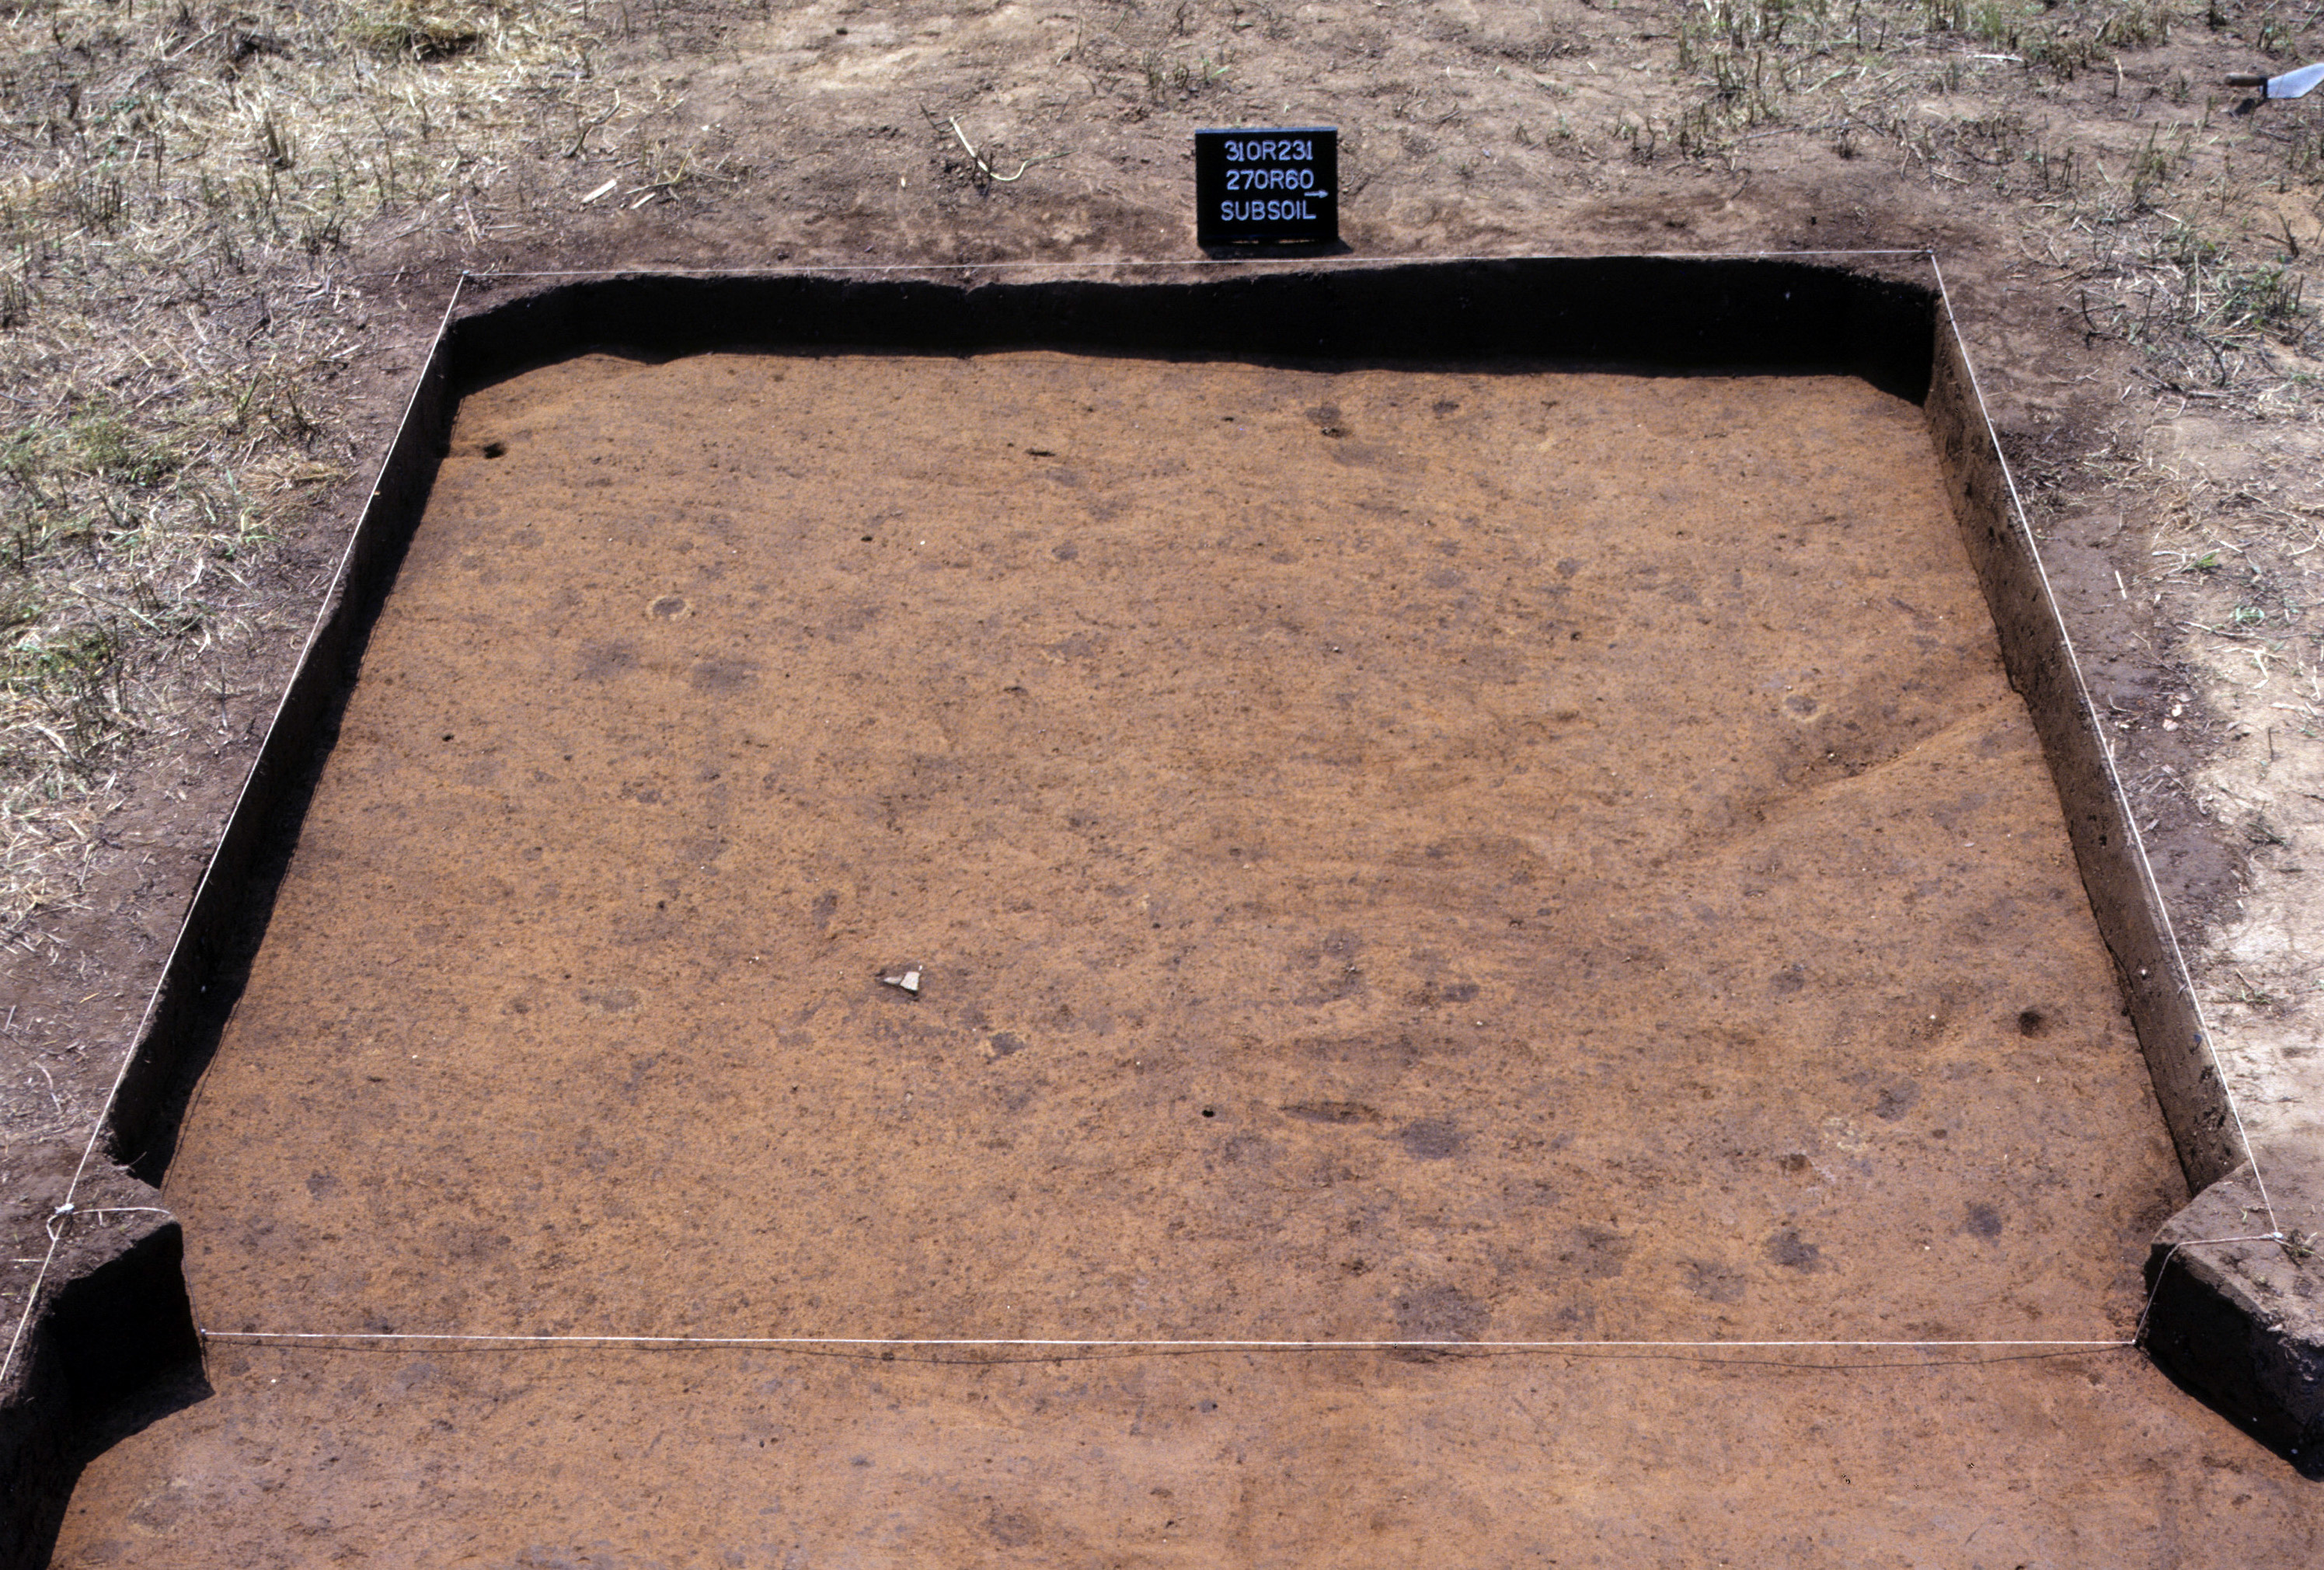 Figure 937. Sq. 270R60 at top of subsoil (view to west).